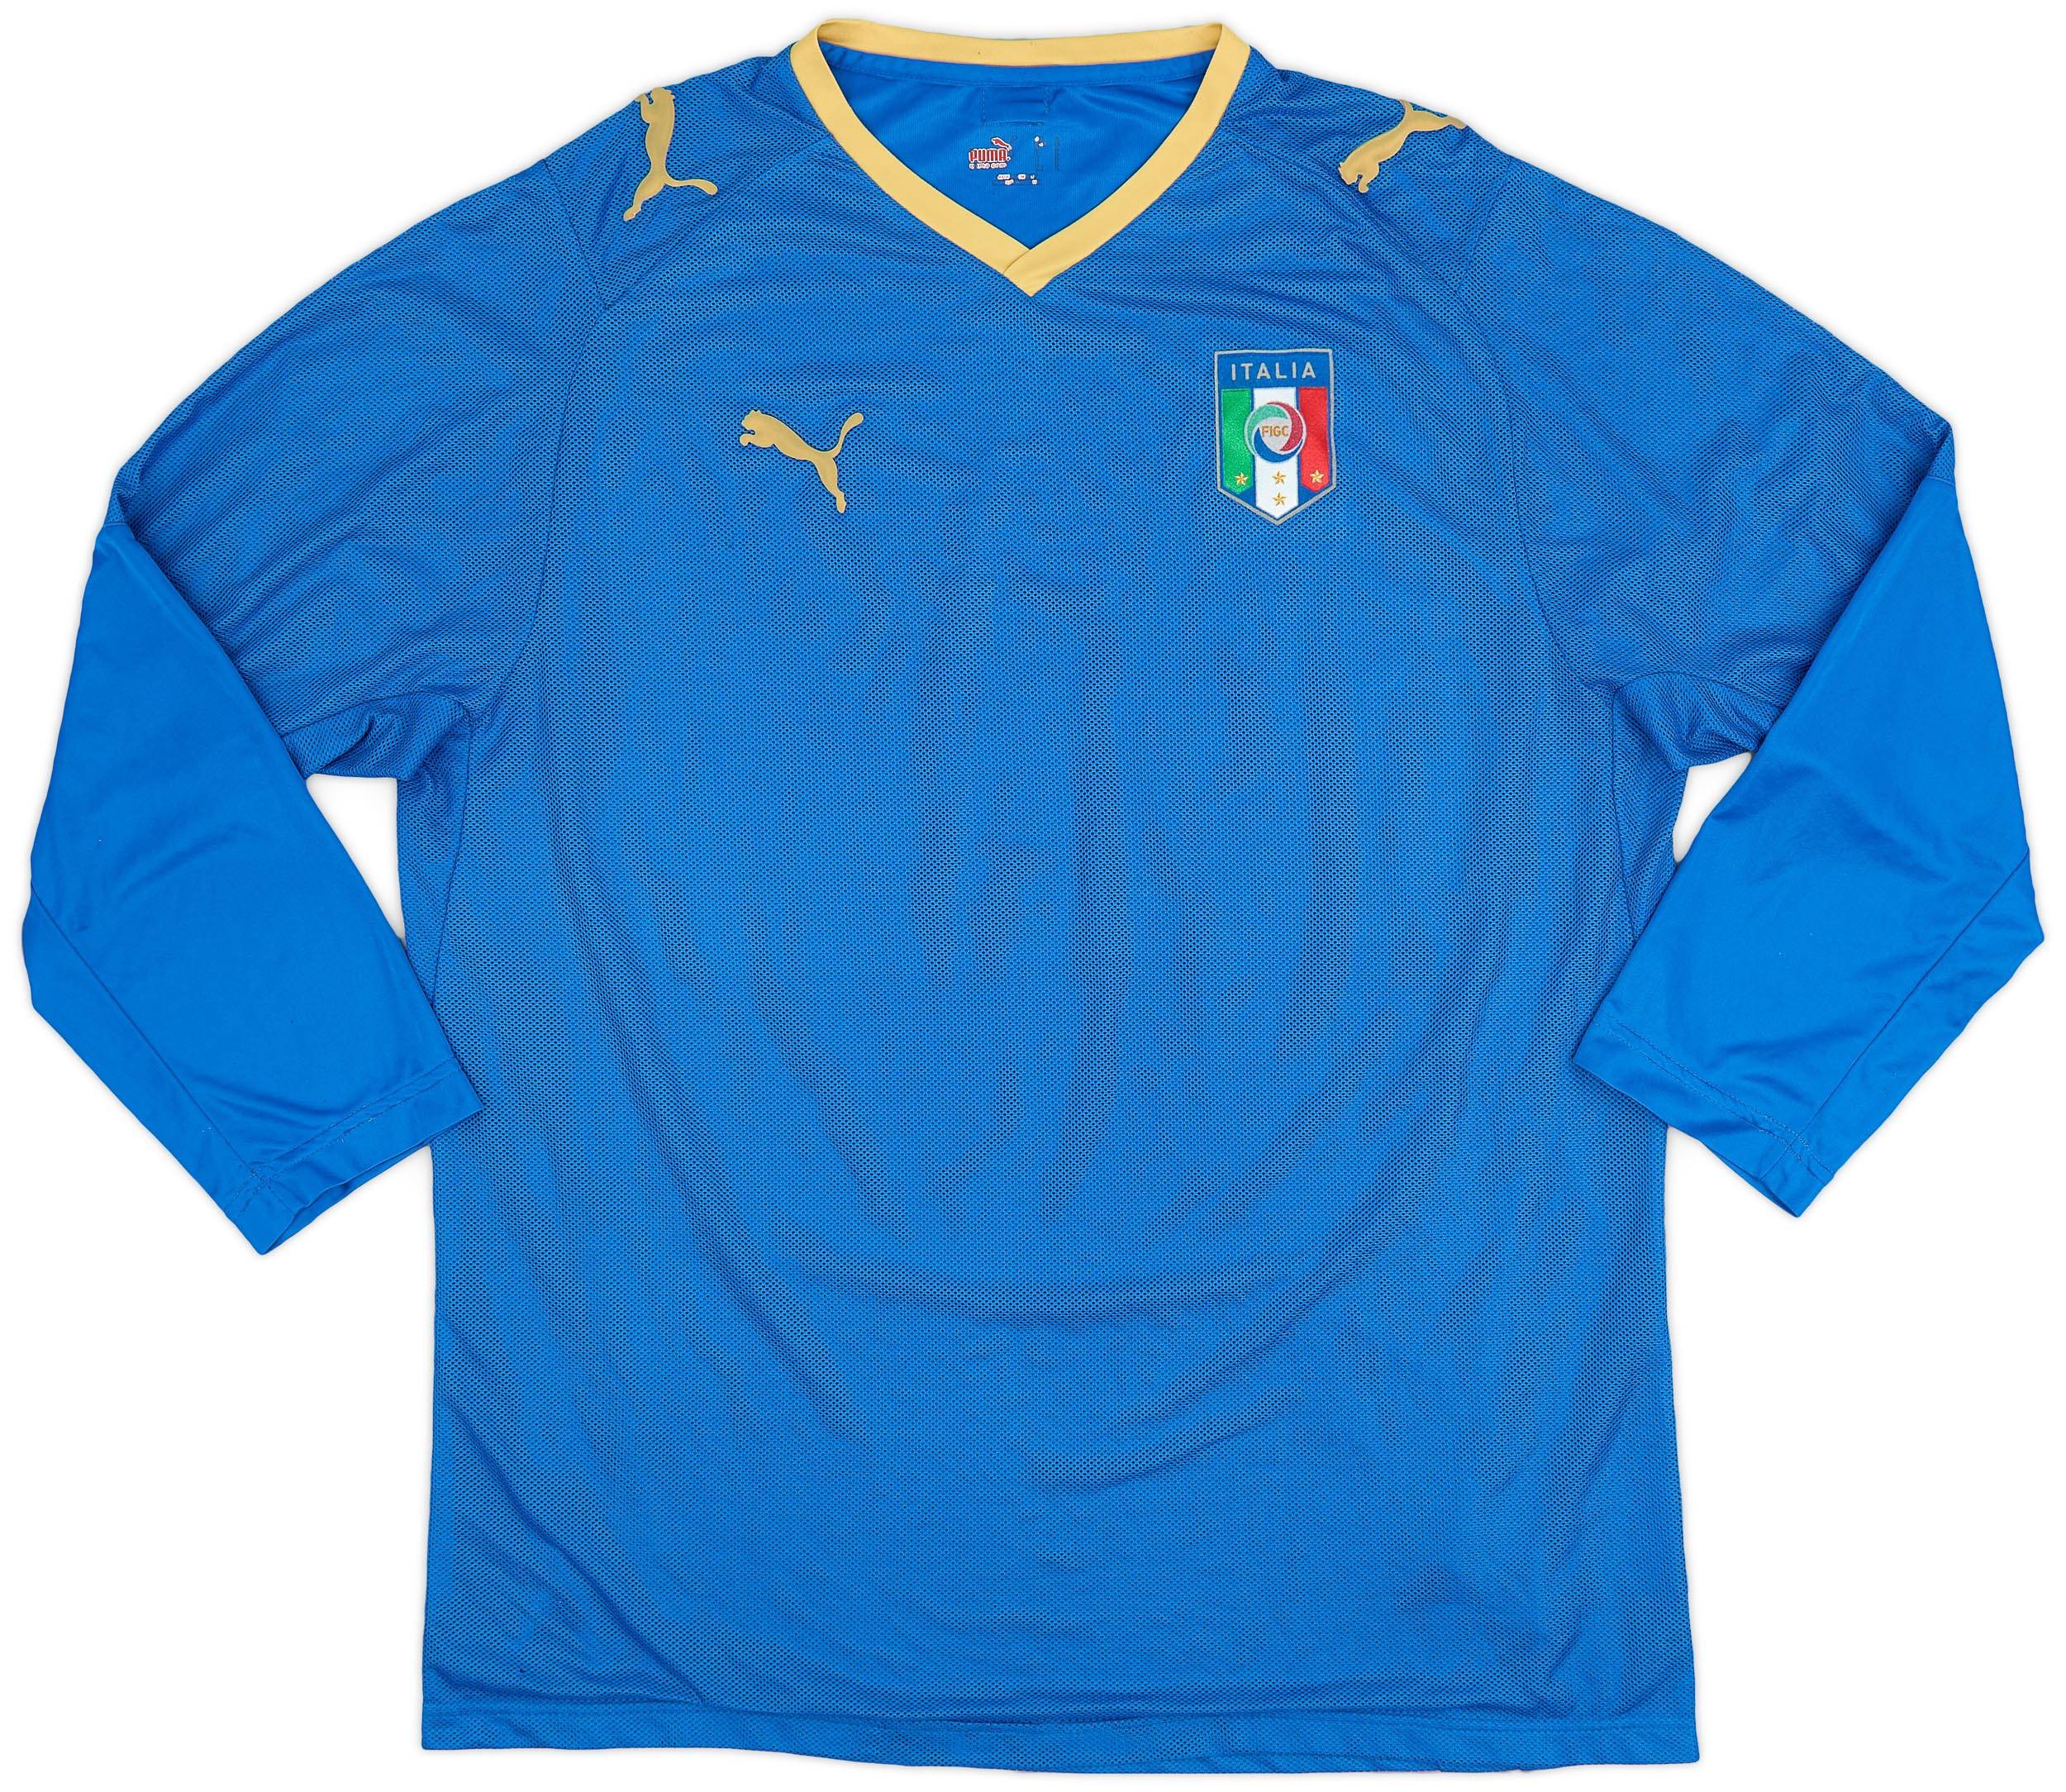 2007-08 Italy Home L/S Shirt - 8/10 - (L)